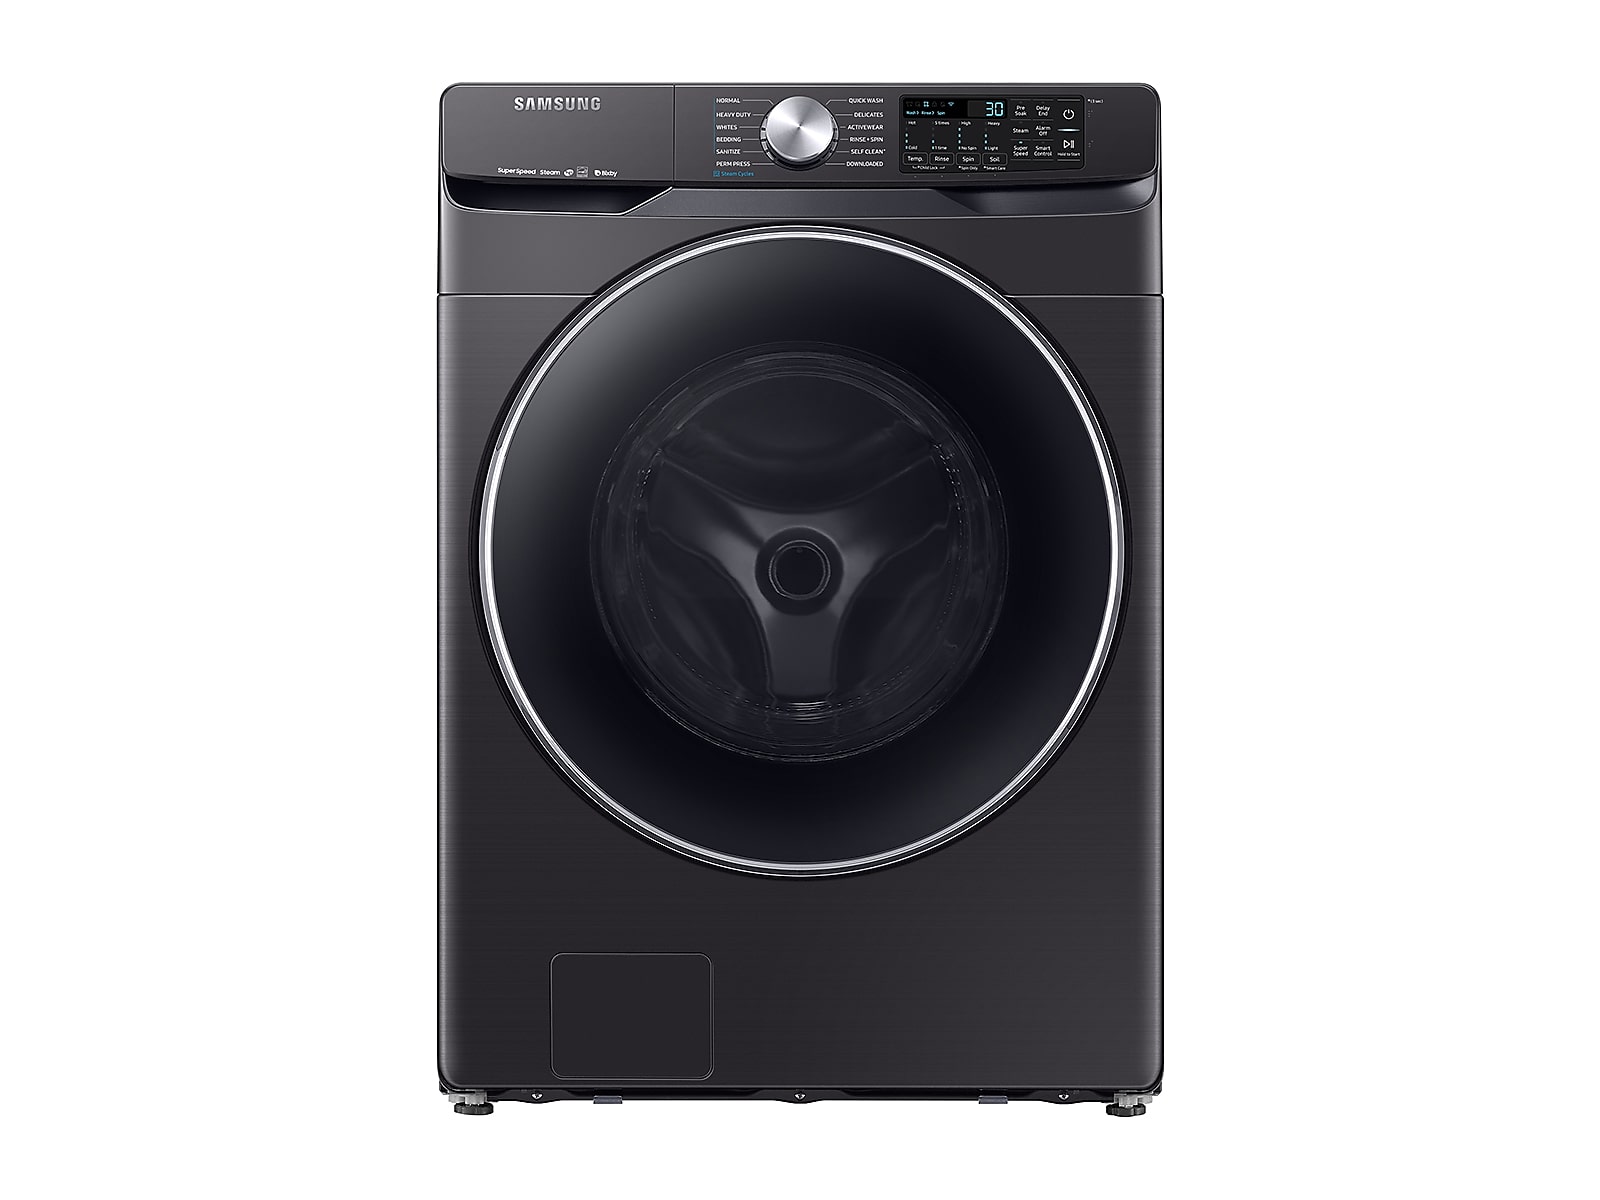 Samsung 4.5 cu. ft. Smart Front Load Washer with Super Speed in Black Stainless Steel(WF45R6300AV/US) photo